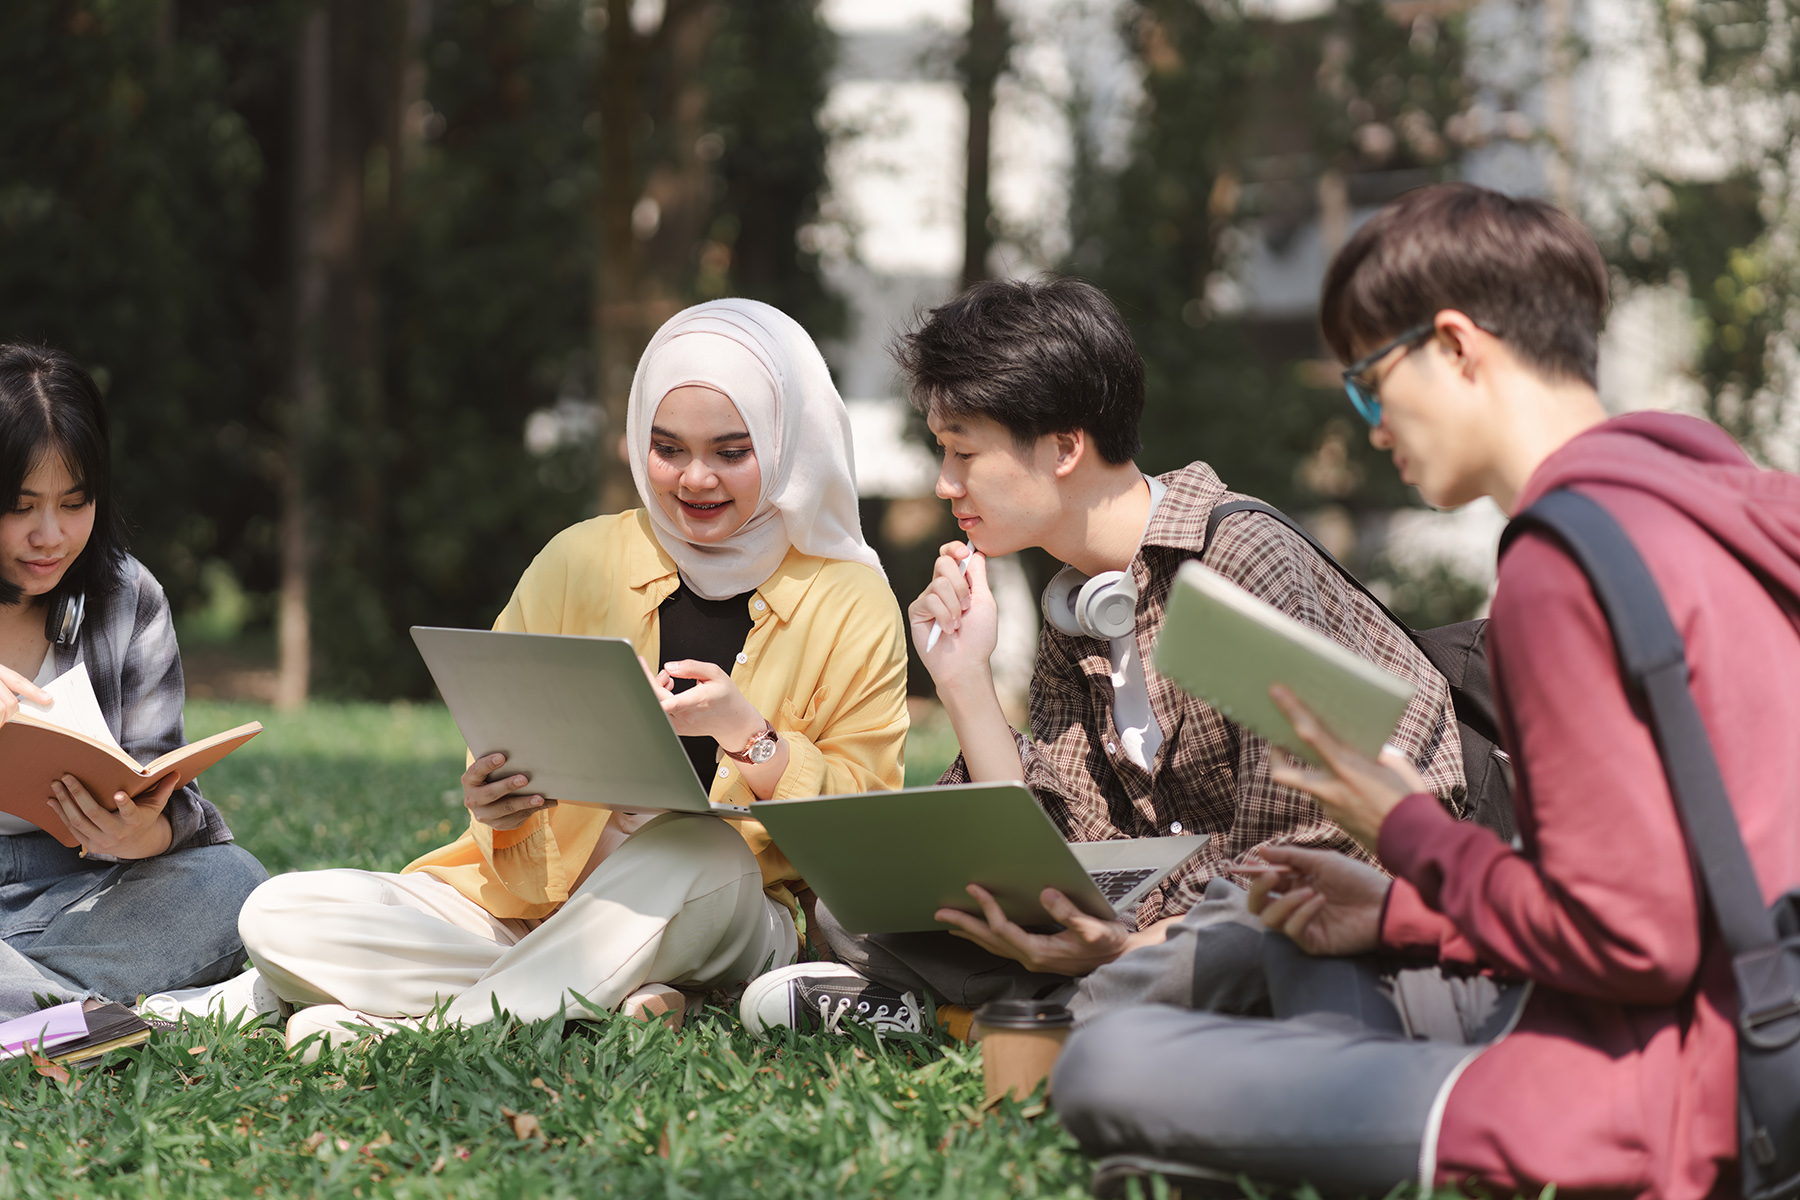 A group of diverse students sits in a circle outside on the grass discussing a project, one holds a laptop